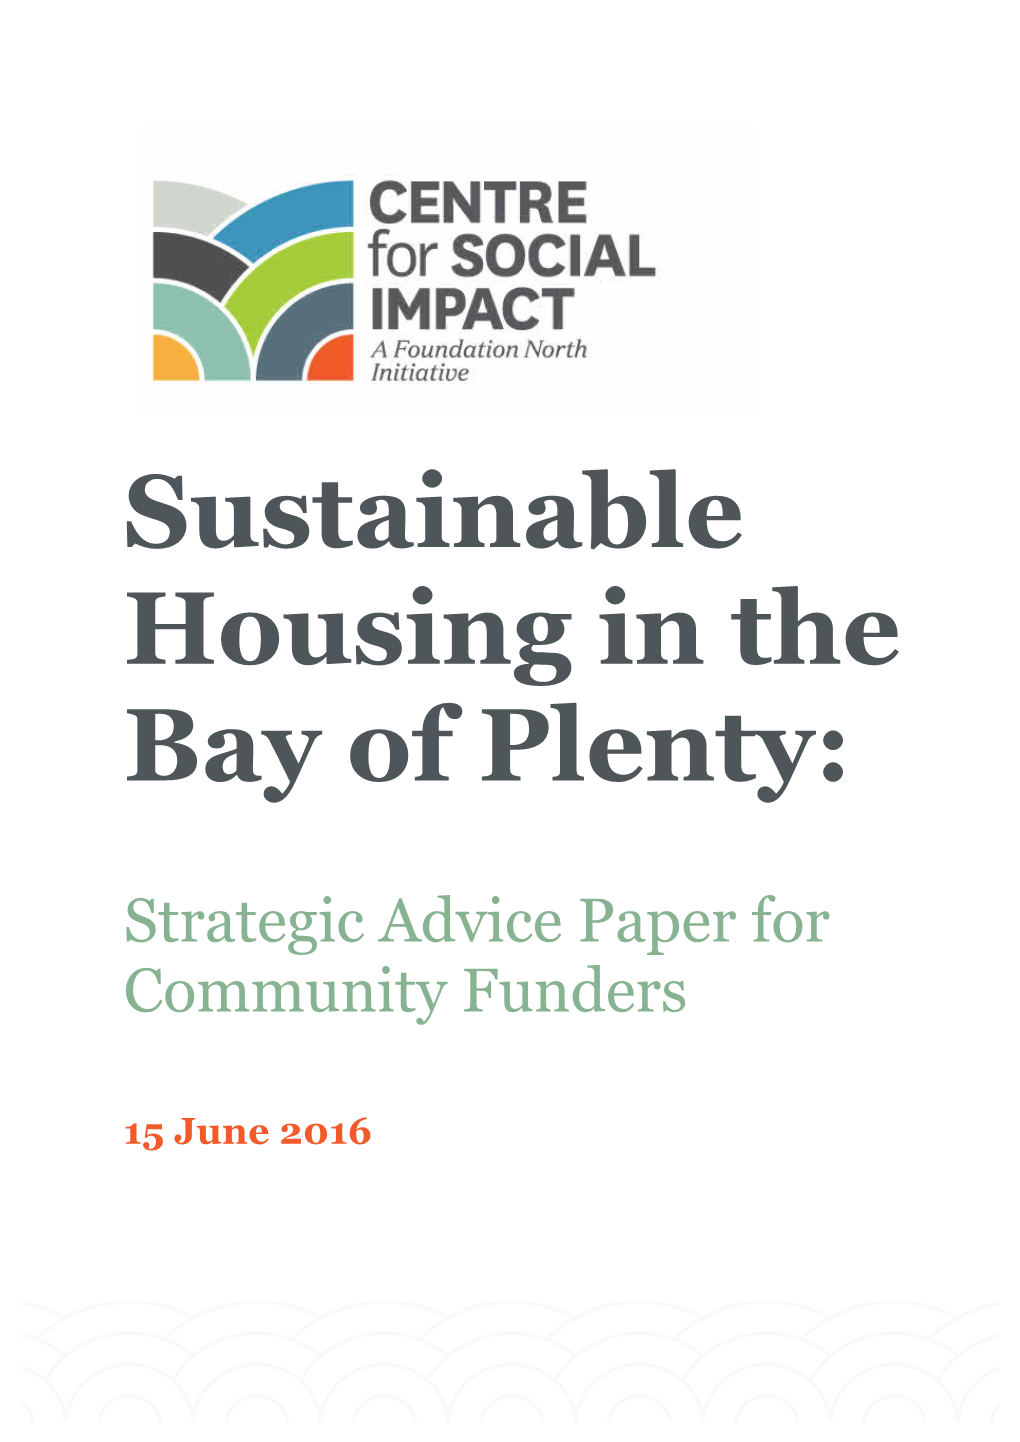 Sustainable Housing in the Bay of Plenty